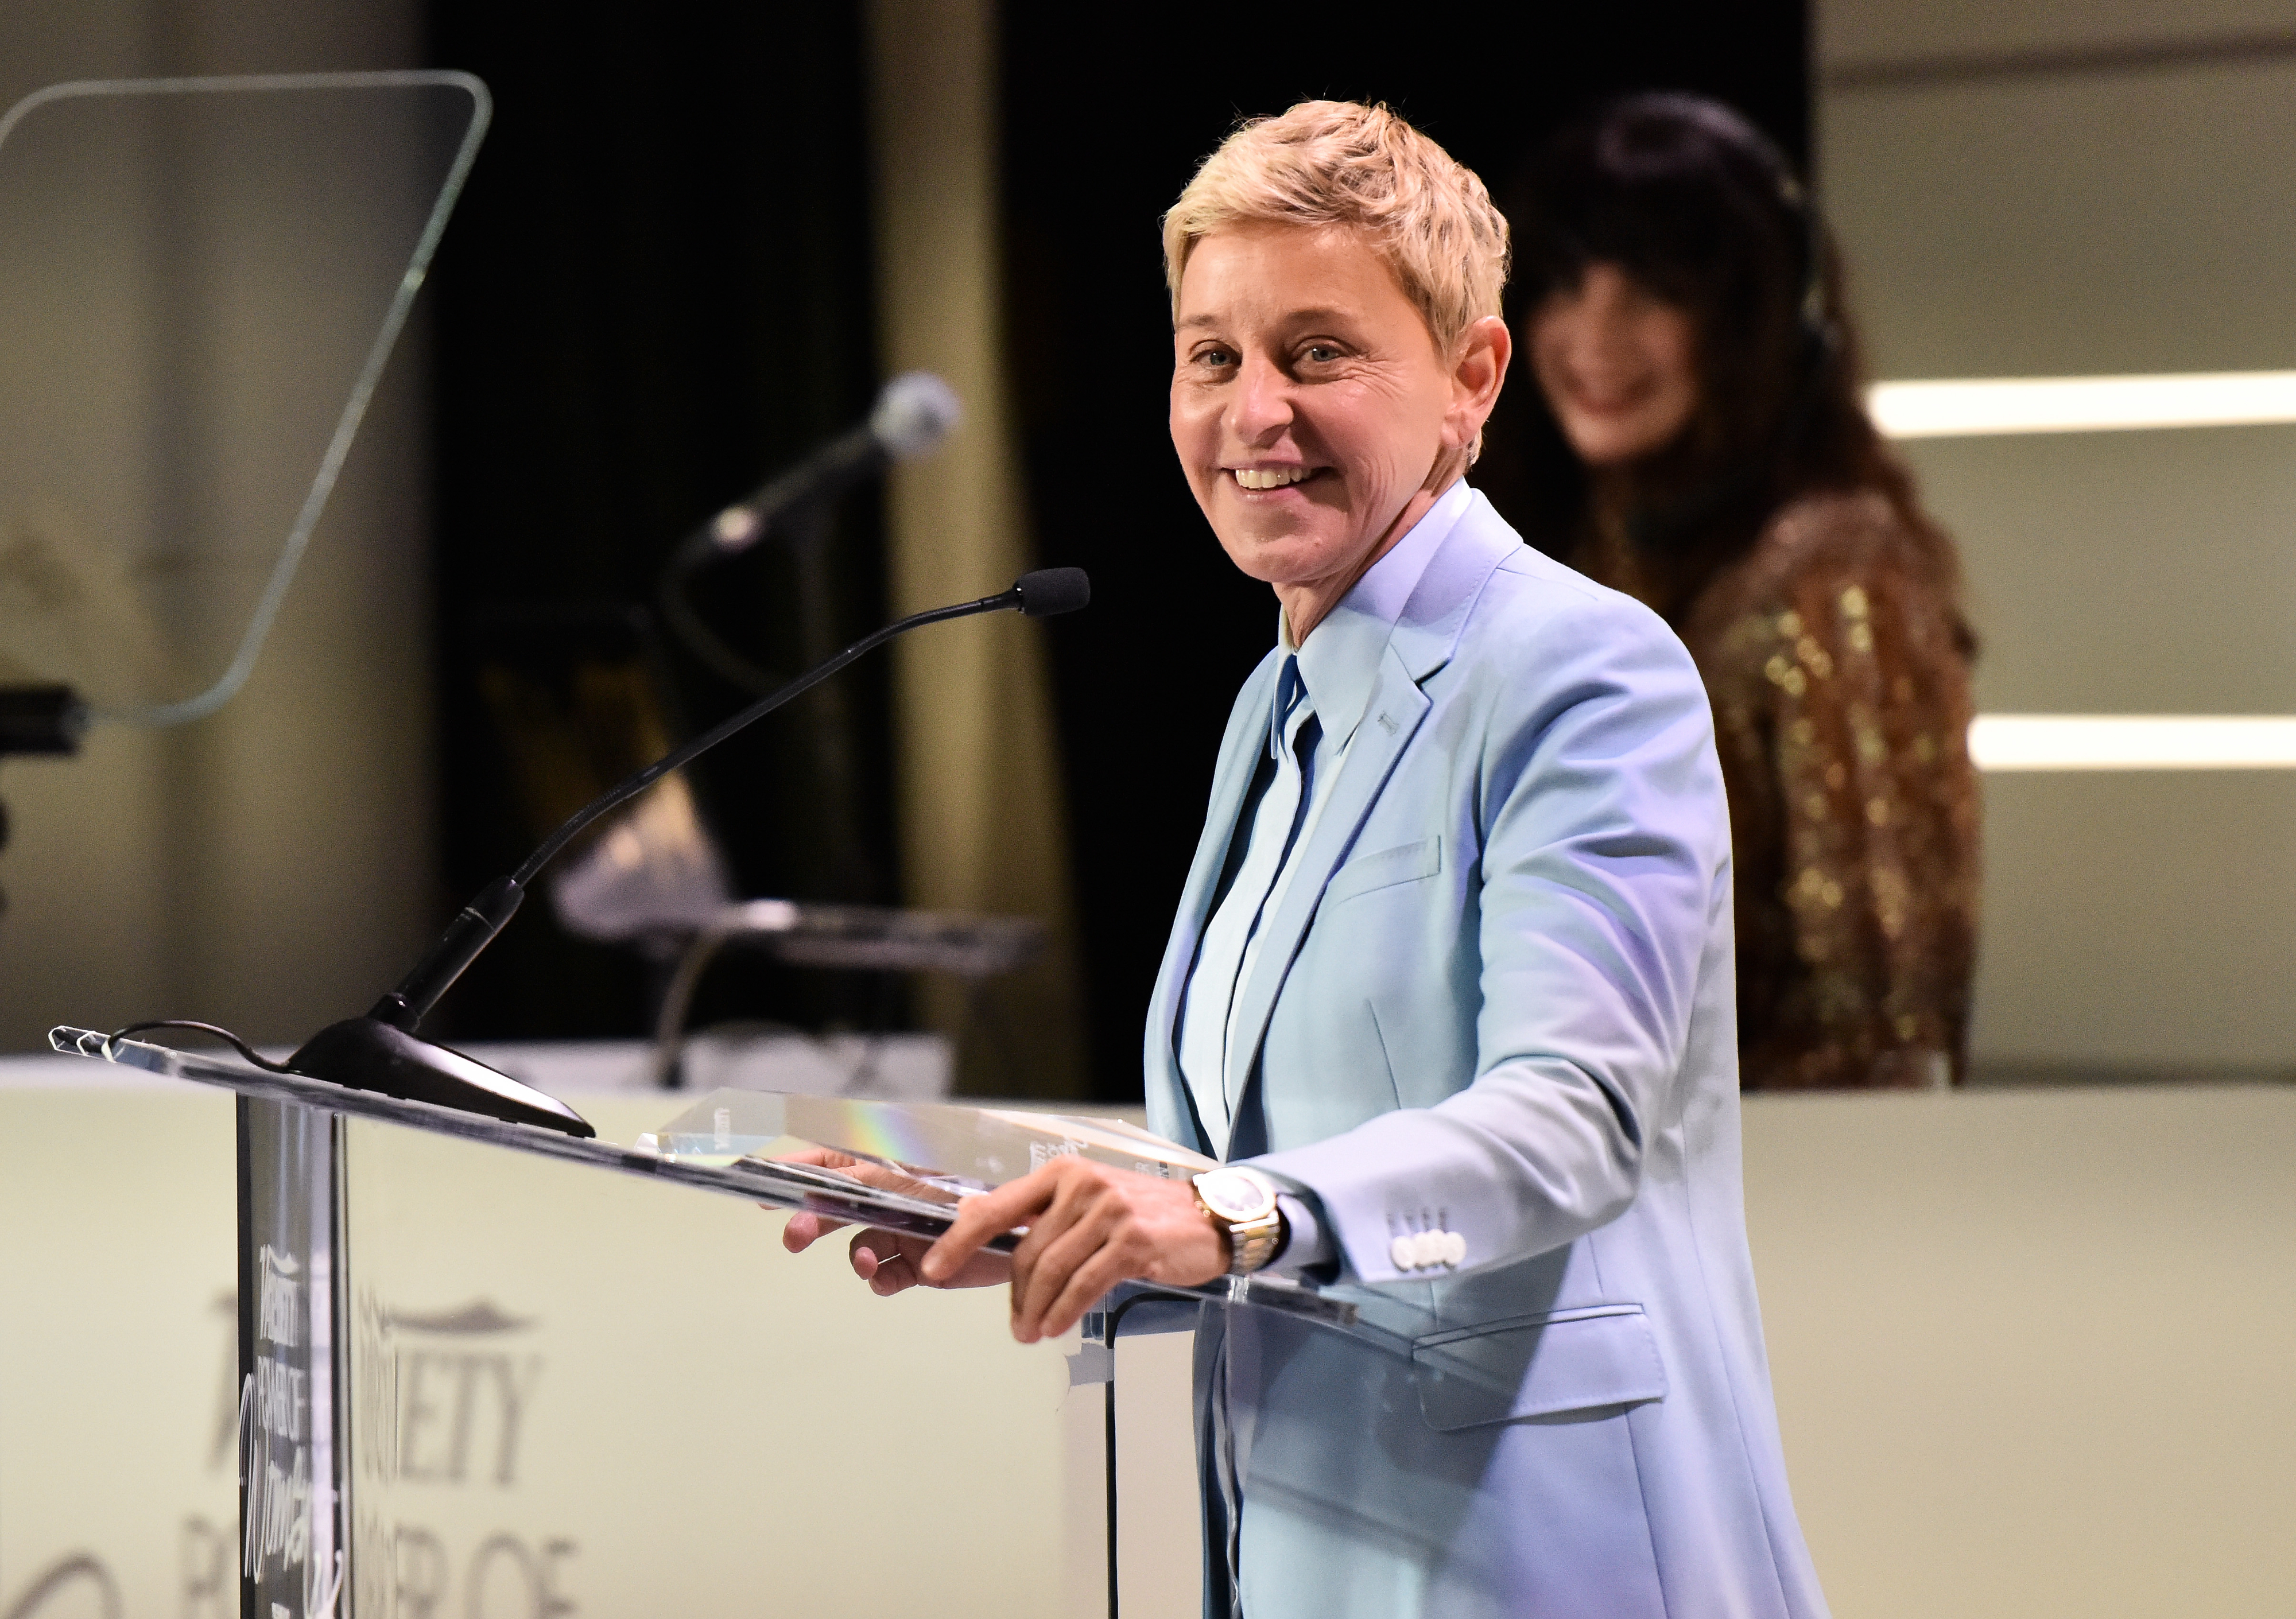 Ellen DeGeneres in a light blue suit speaking at a podium with a smile, another person in background